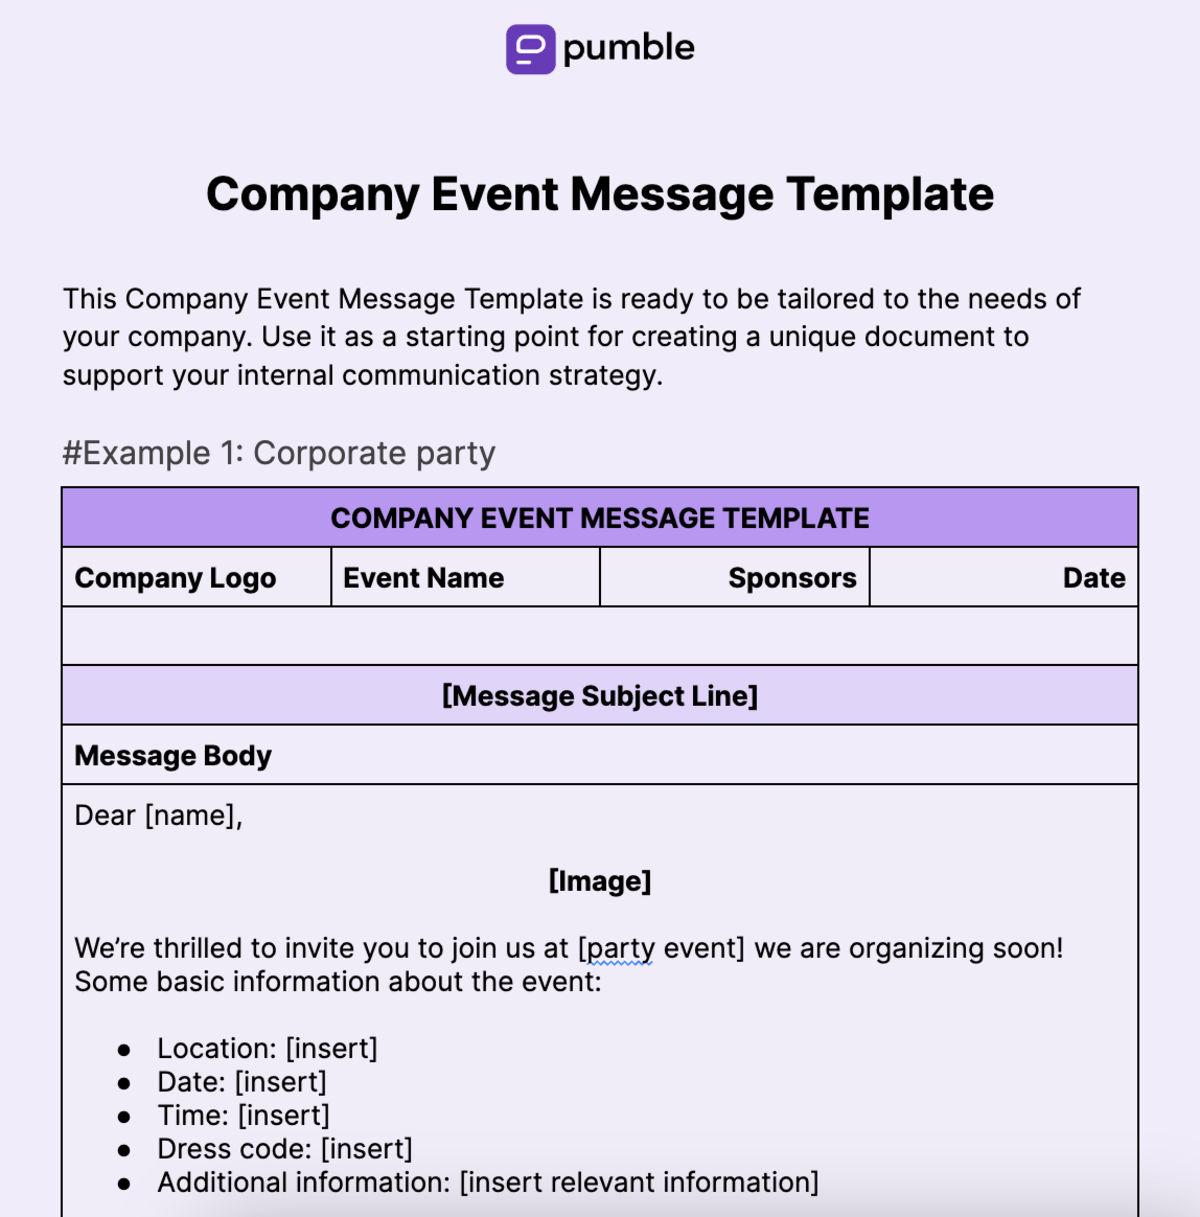 Company Event Message Template